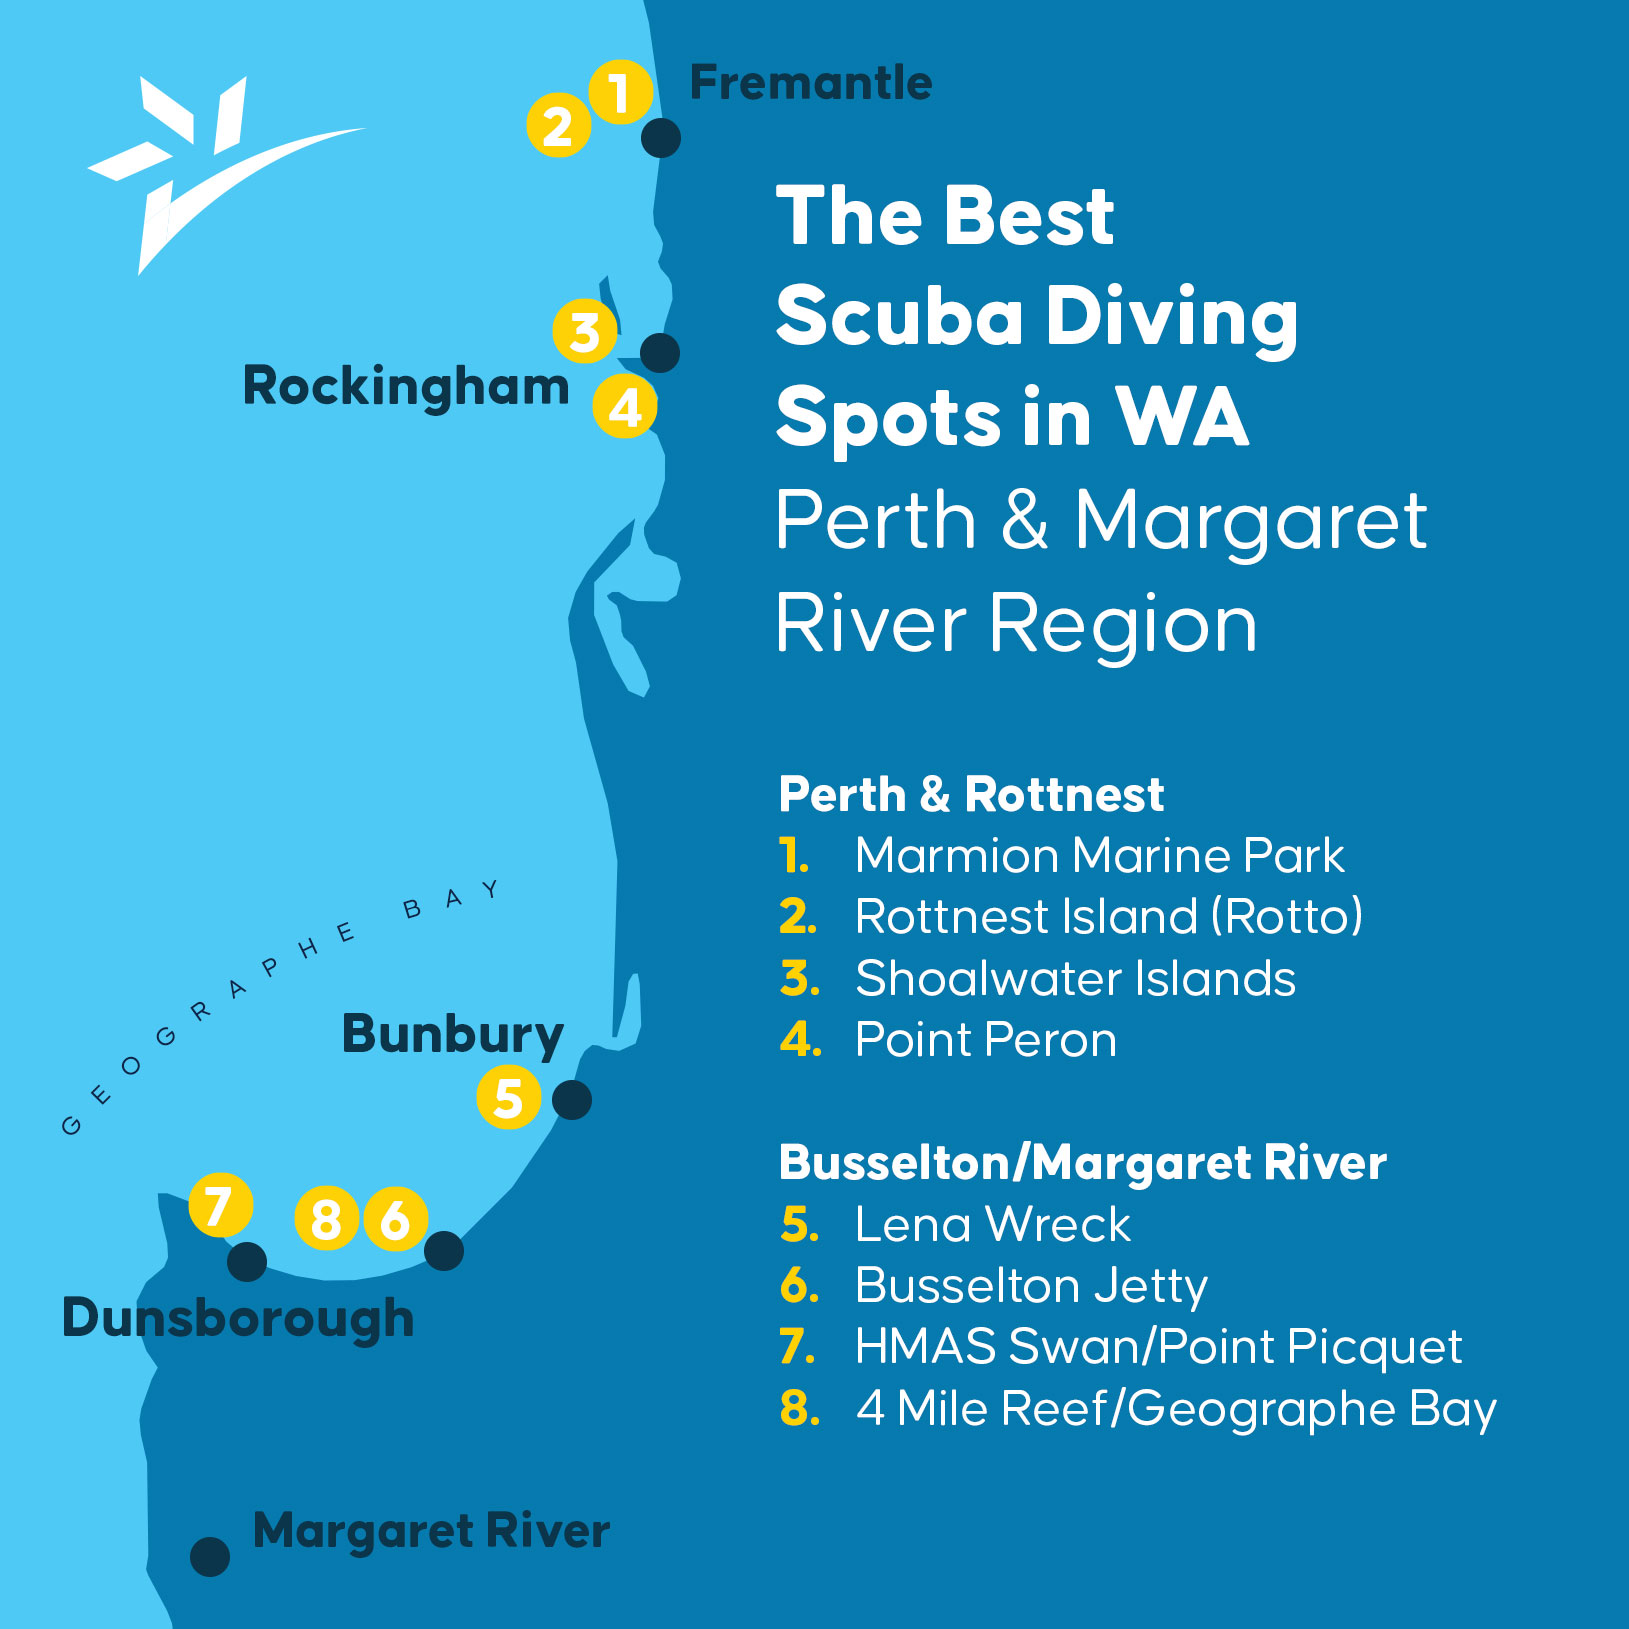 The Best Scuba Diving Spots in WA Perth and Margaret River region.